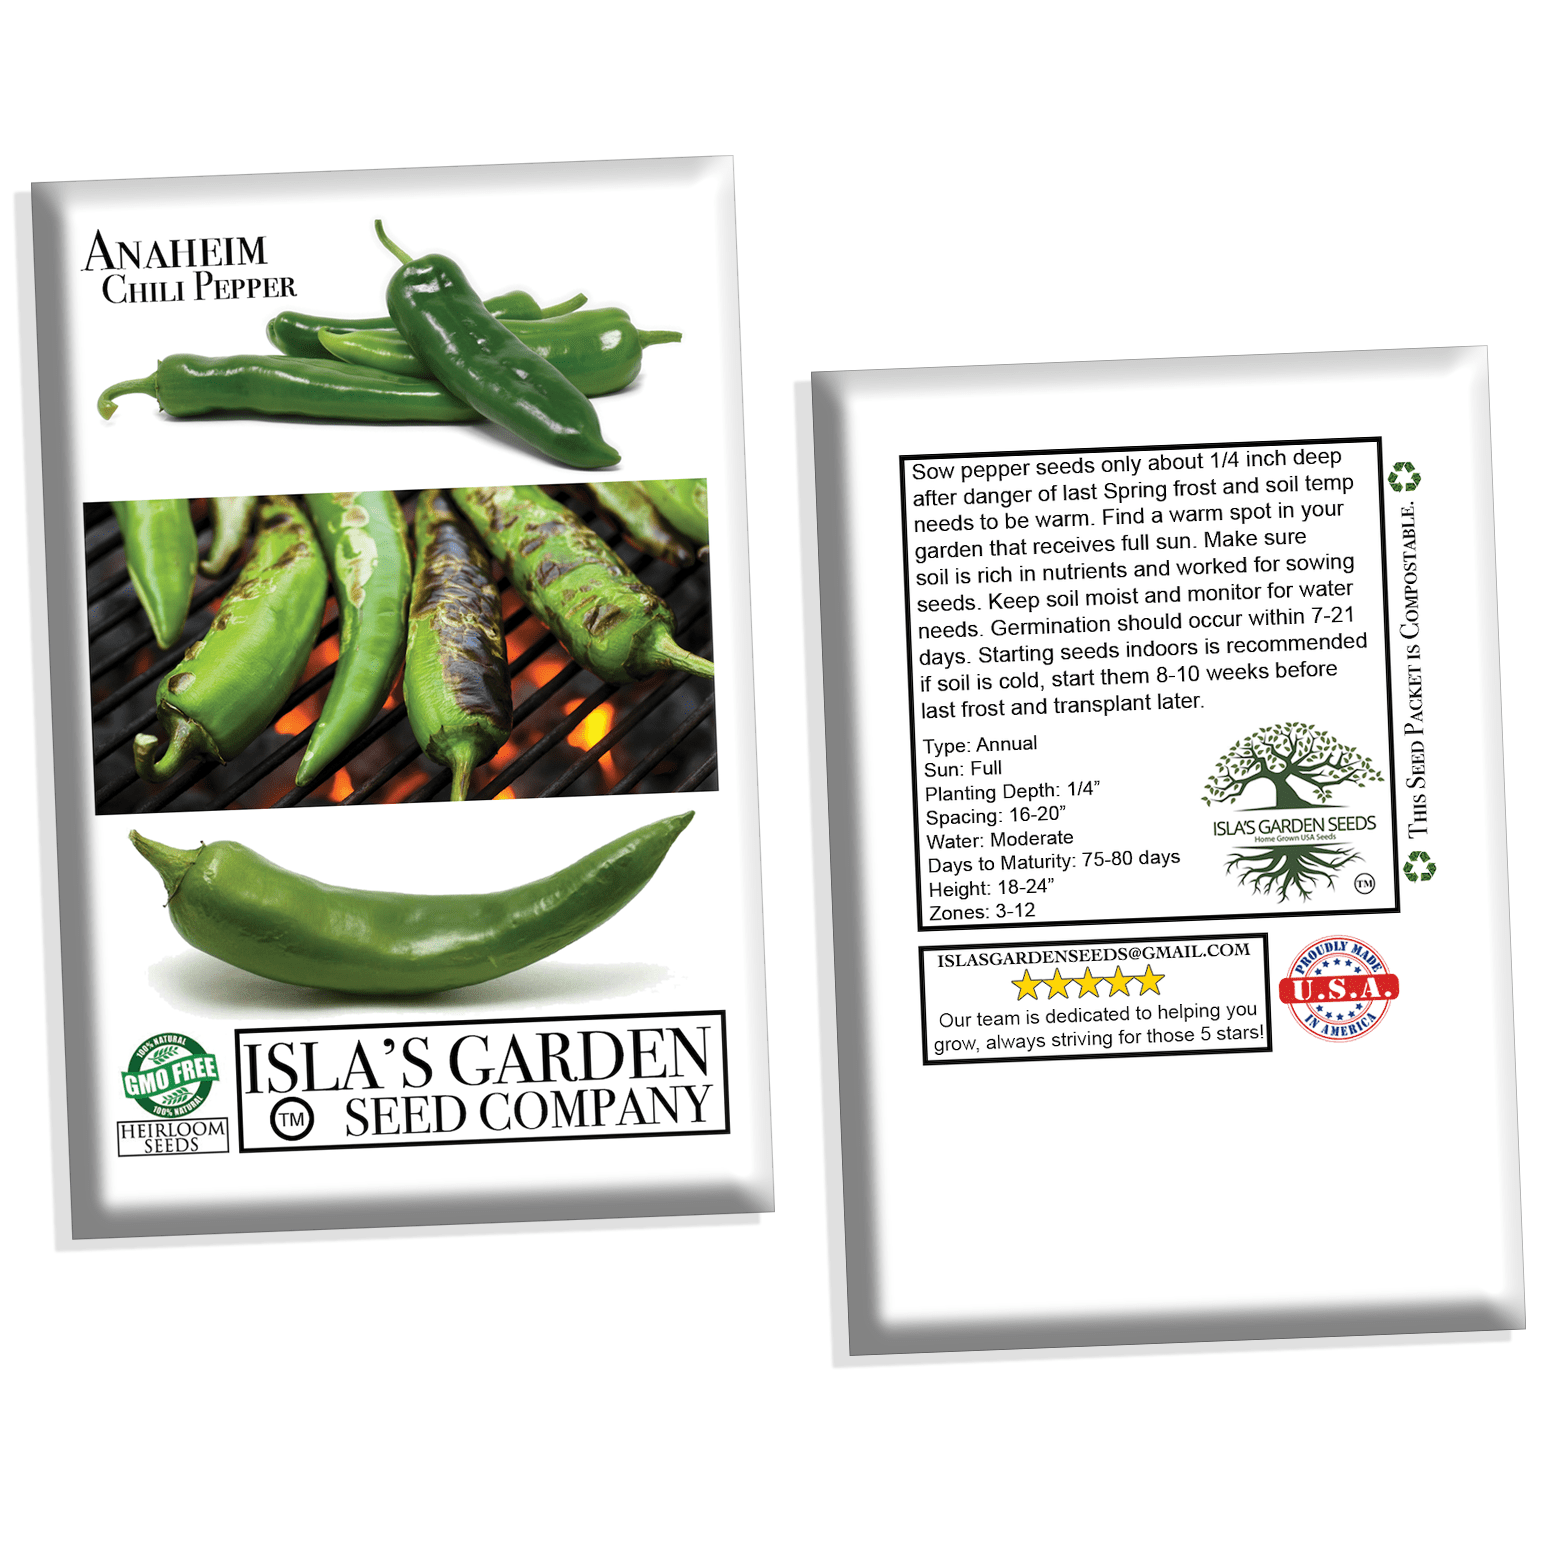 Anaheim Chili Pepper Seeds, 100 Heirloom Seeds Per Packet, Non GMO Seeds